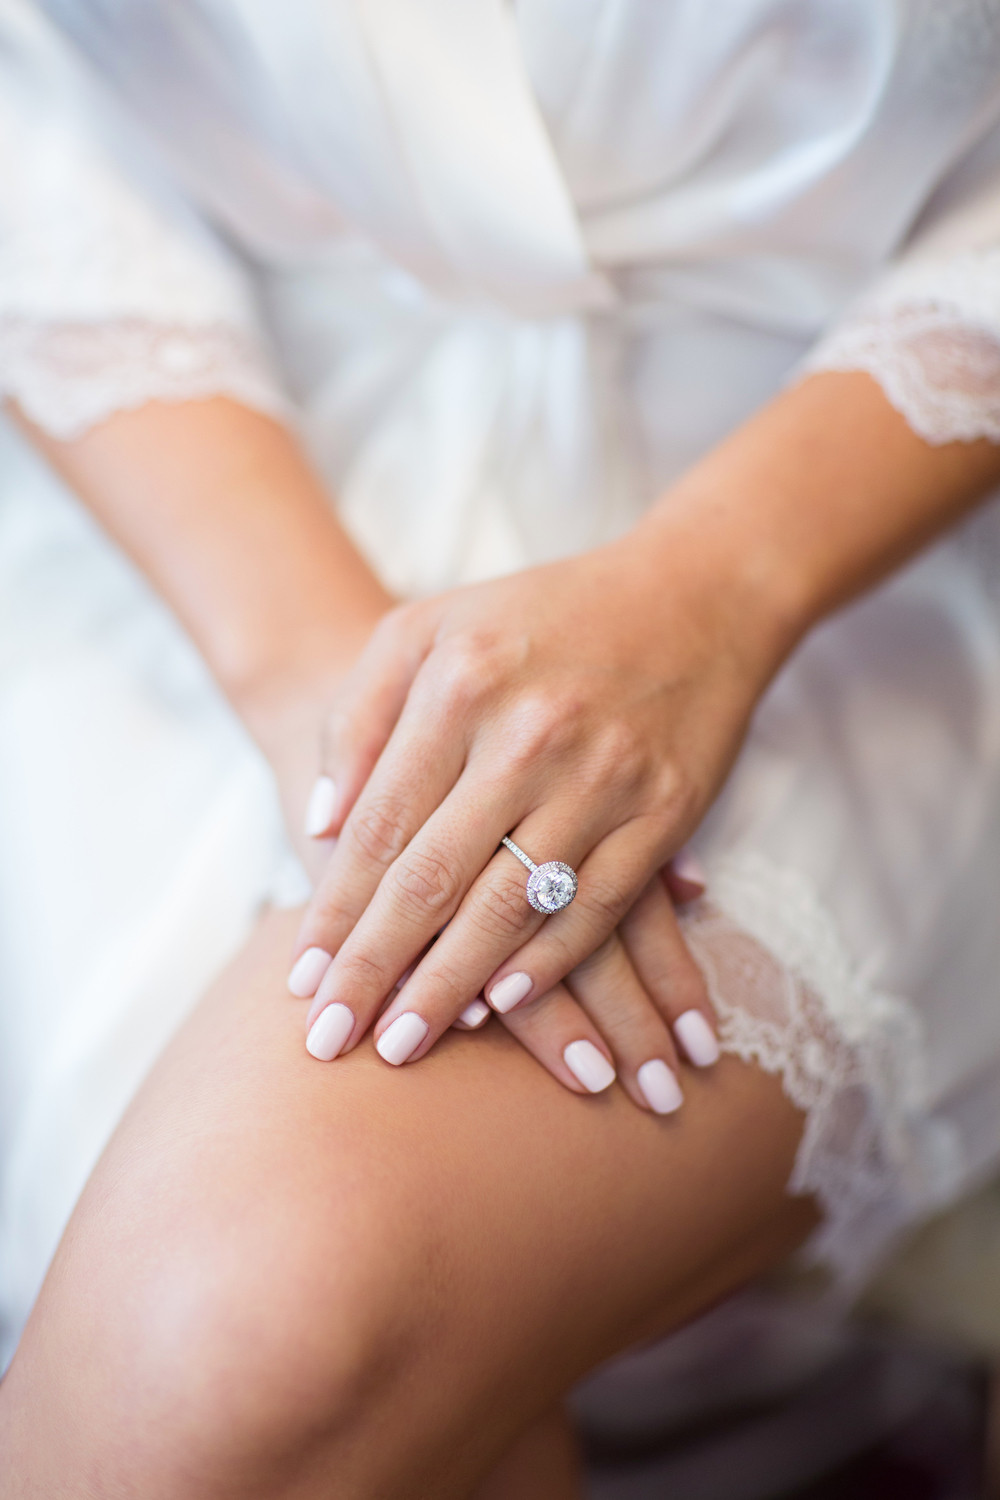 Wedding Nails Pictures
 5 Nail Polish Shades That Will Make Your Hands Glow The